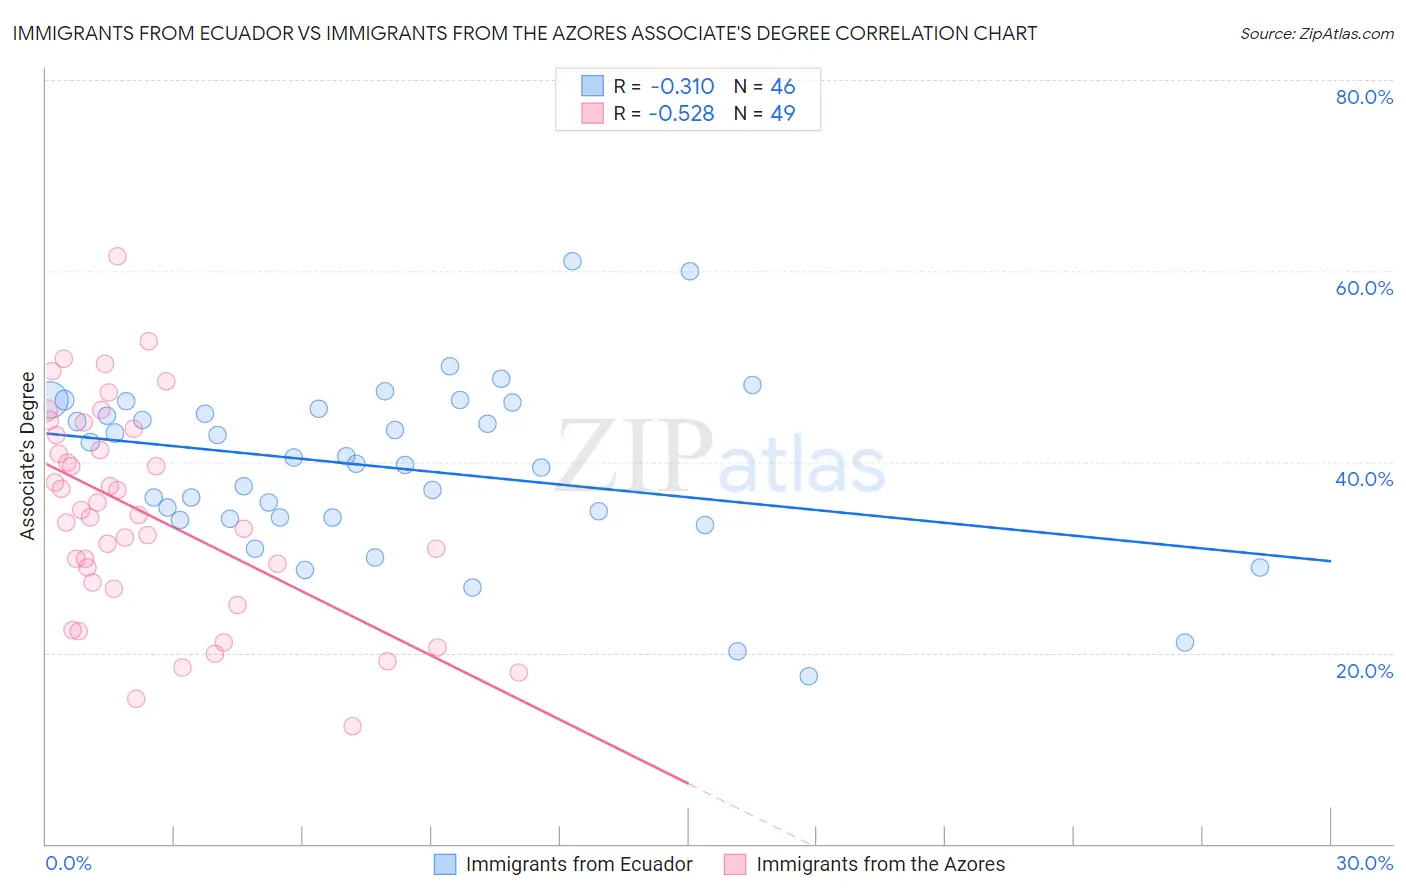 Immigrants from Ecuador vs Immigrants from the Azores Associate's Degree